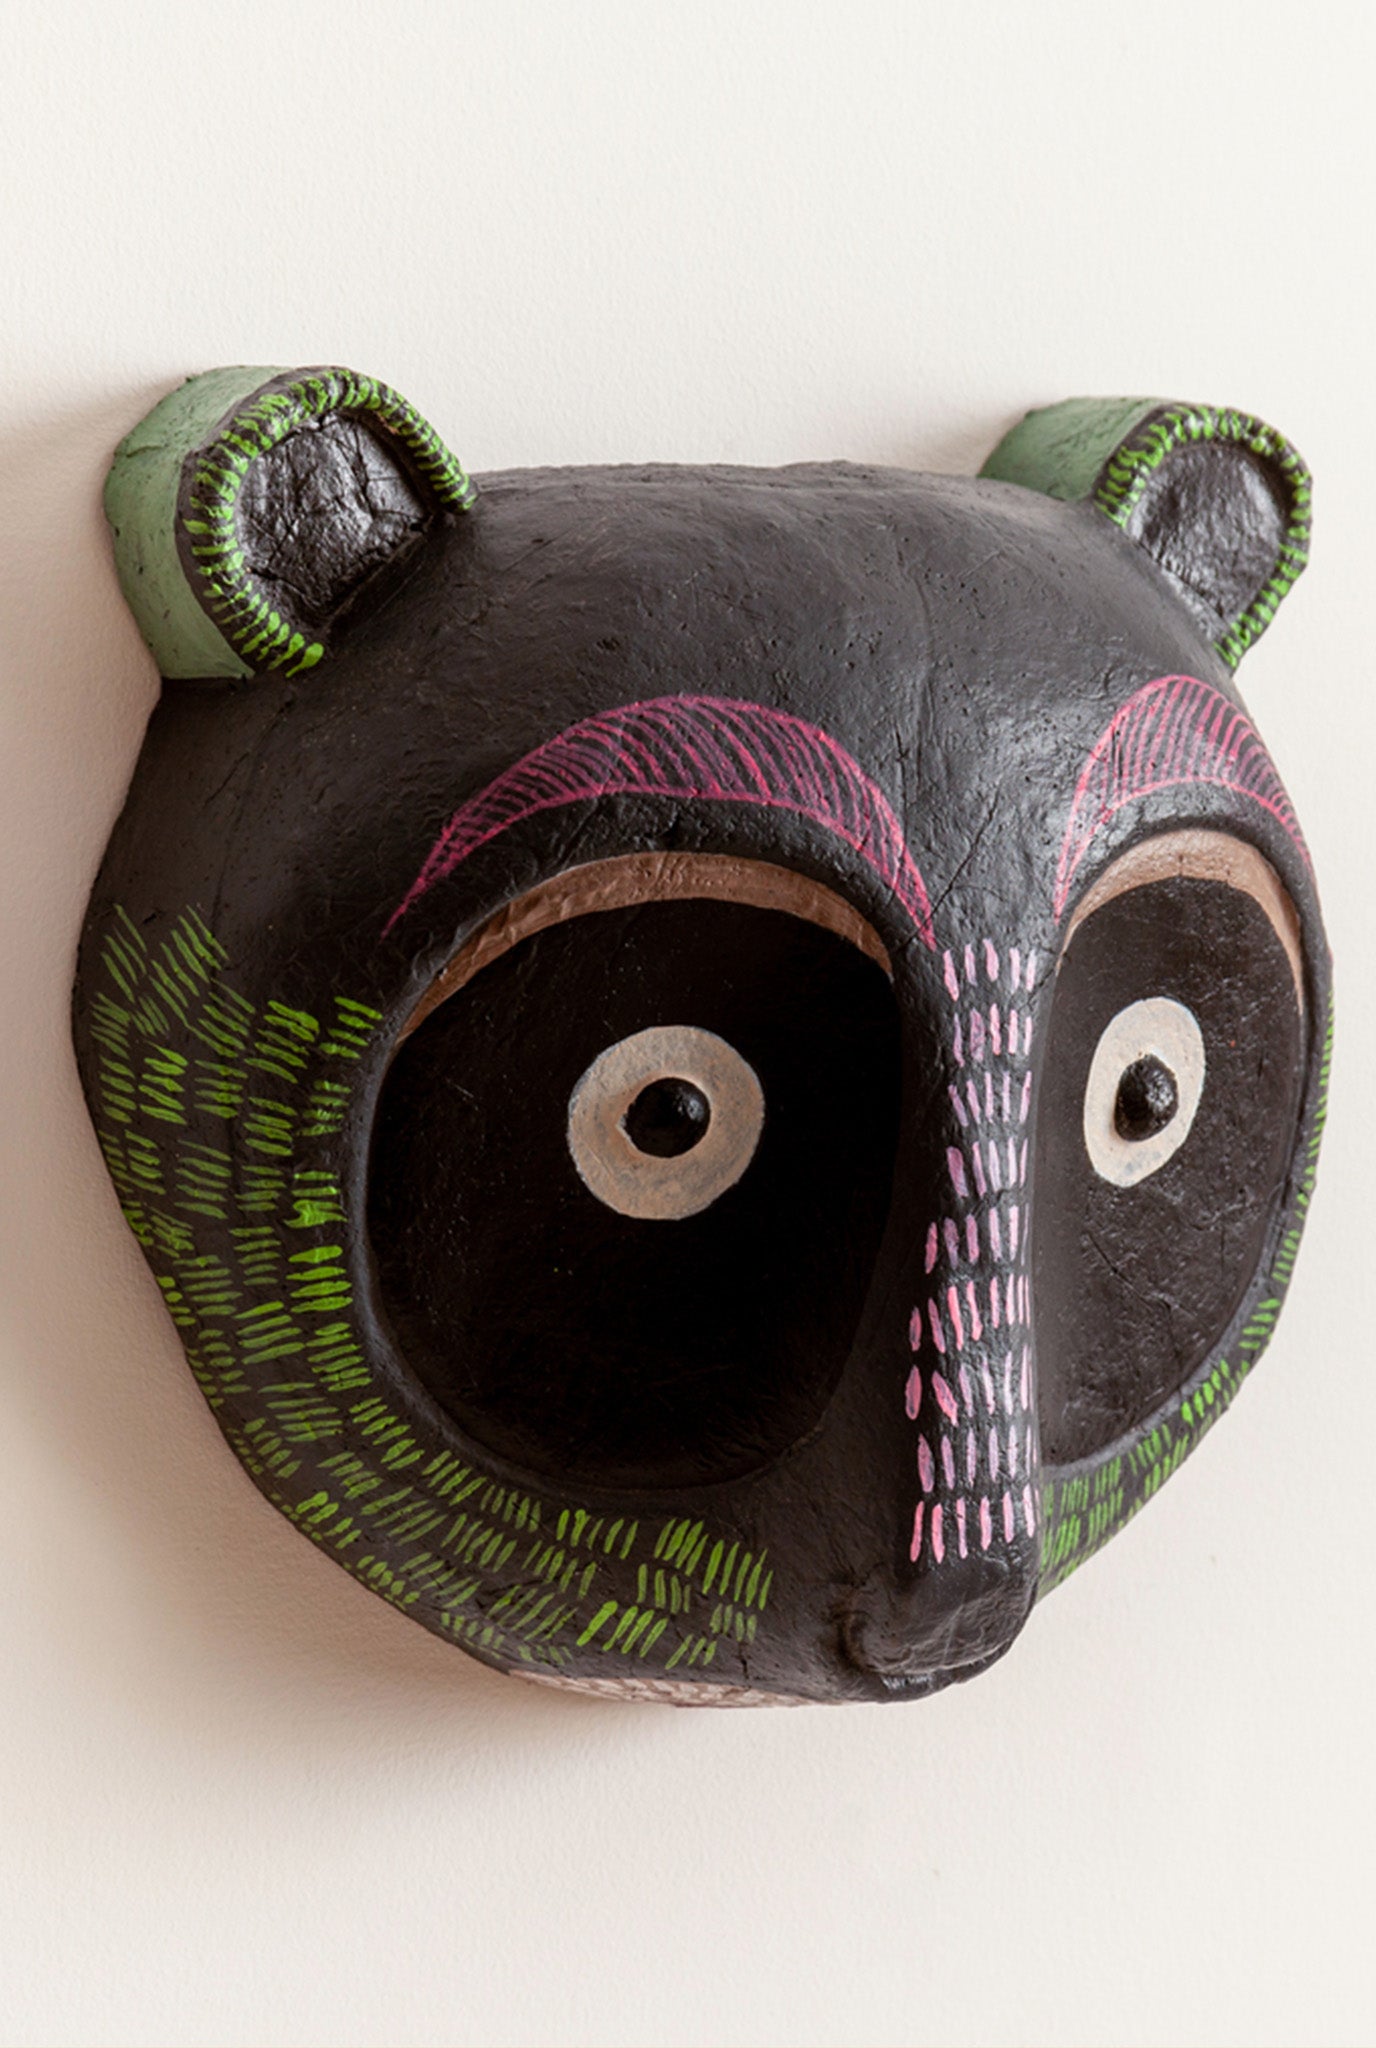 Papier-mâché- handcrafted-hand-painted-wall decor-animal-mask- wall mask